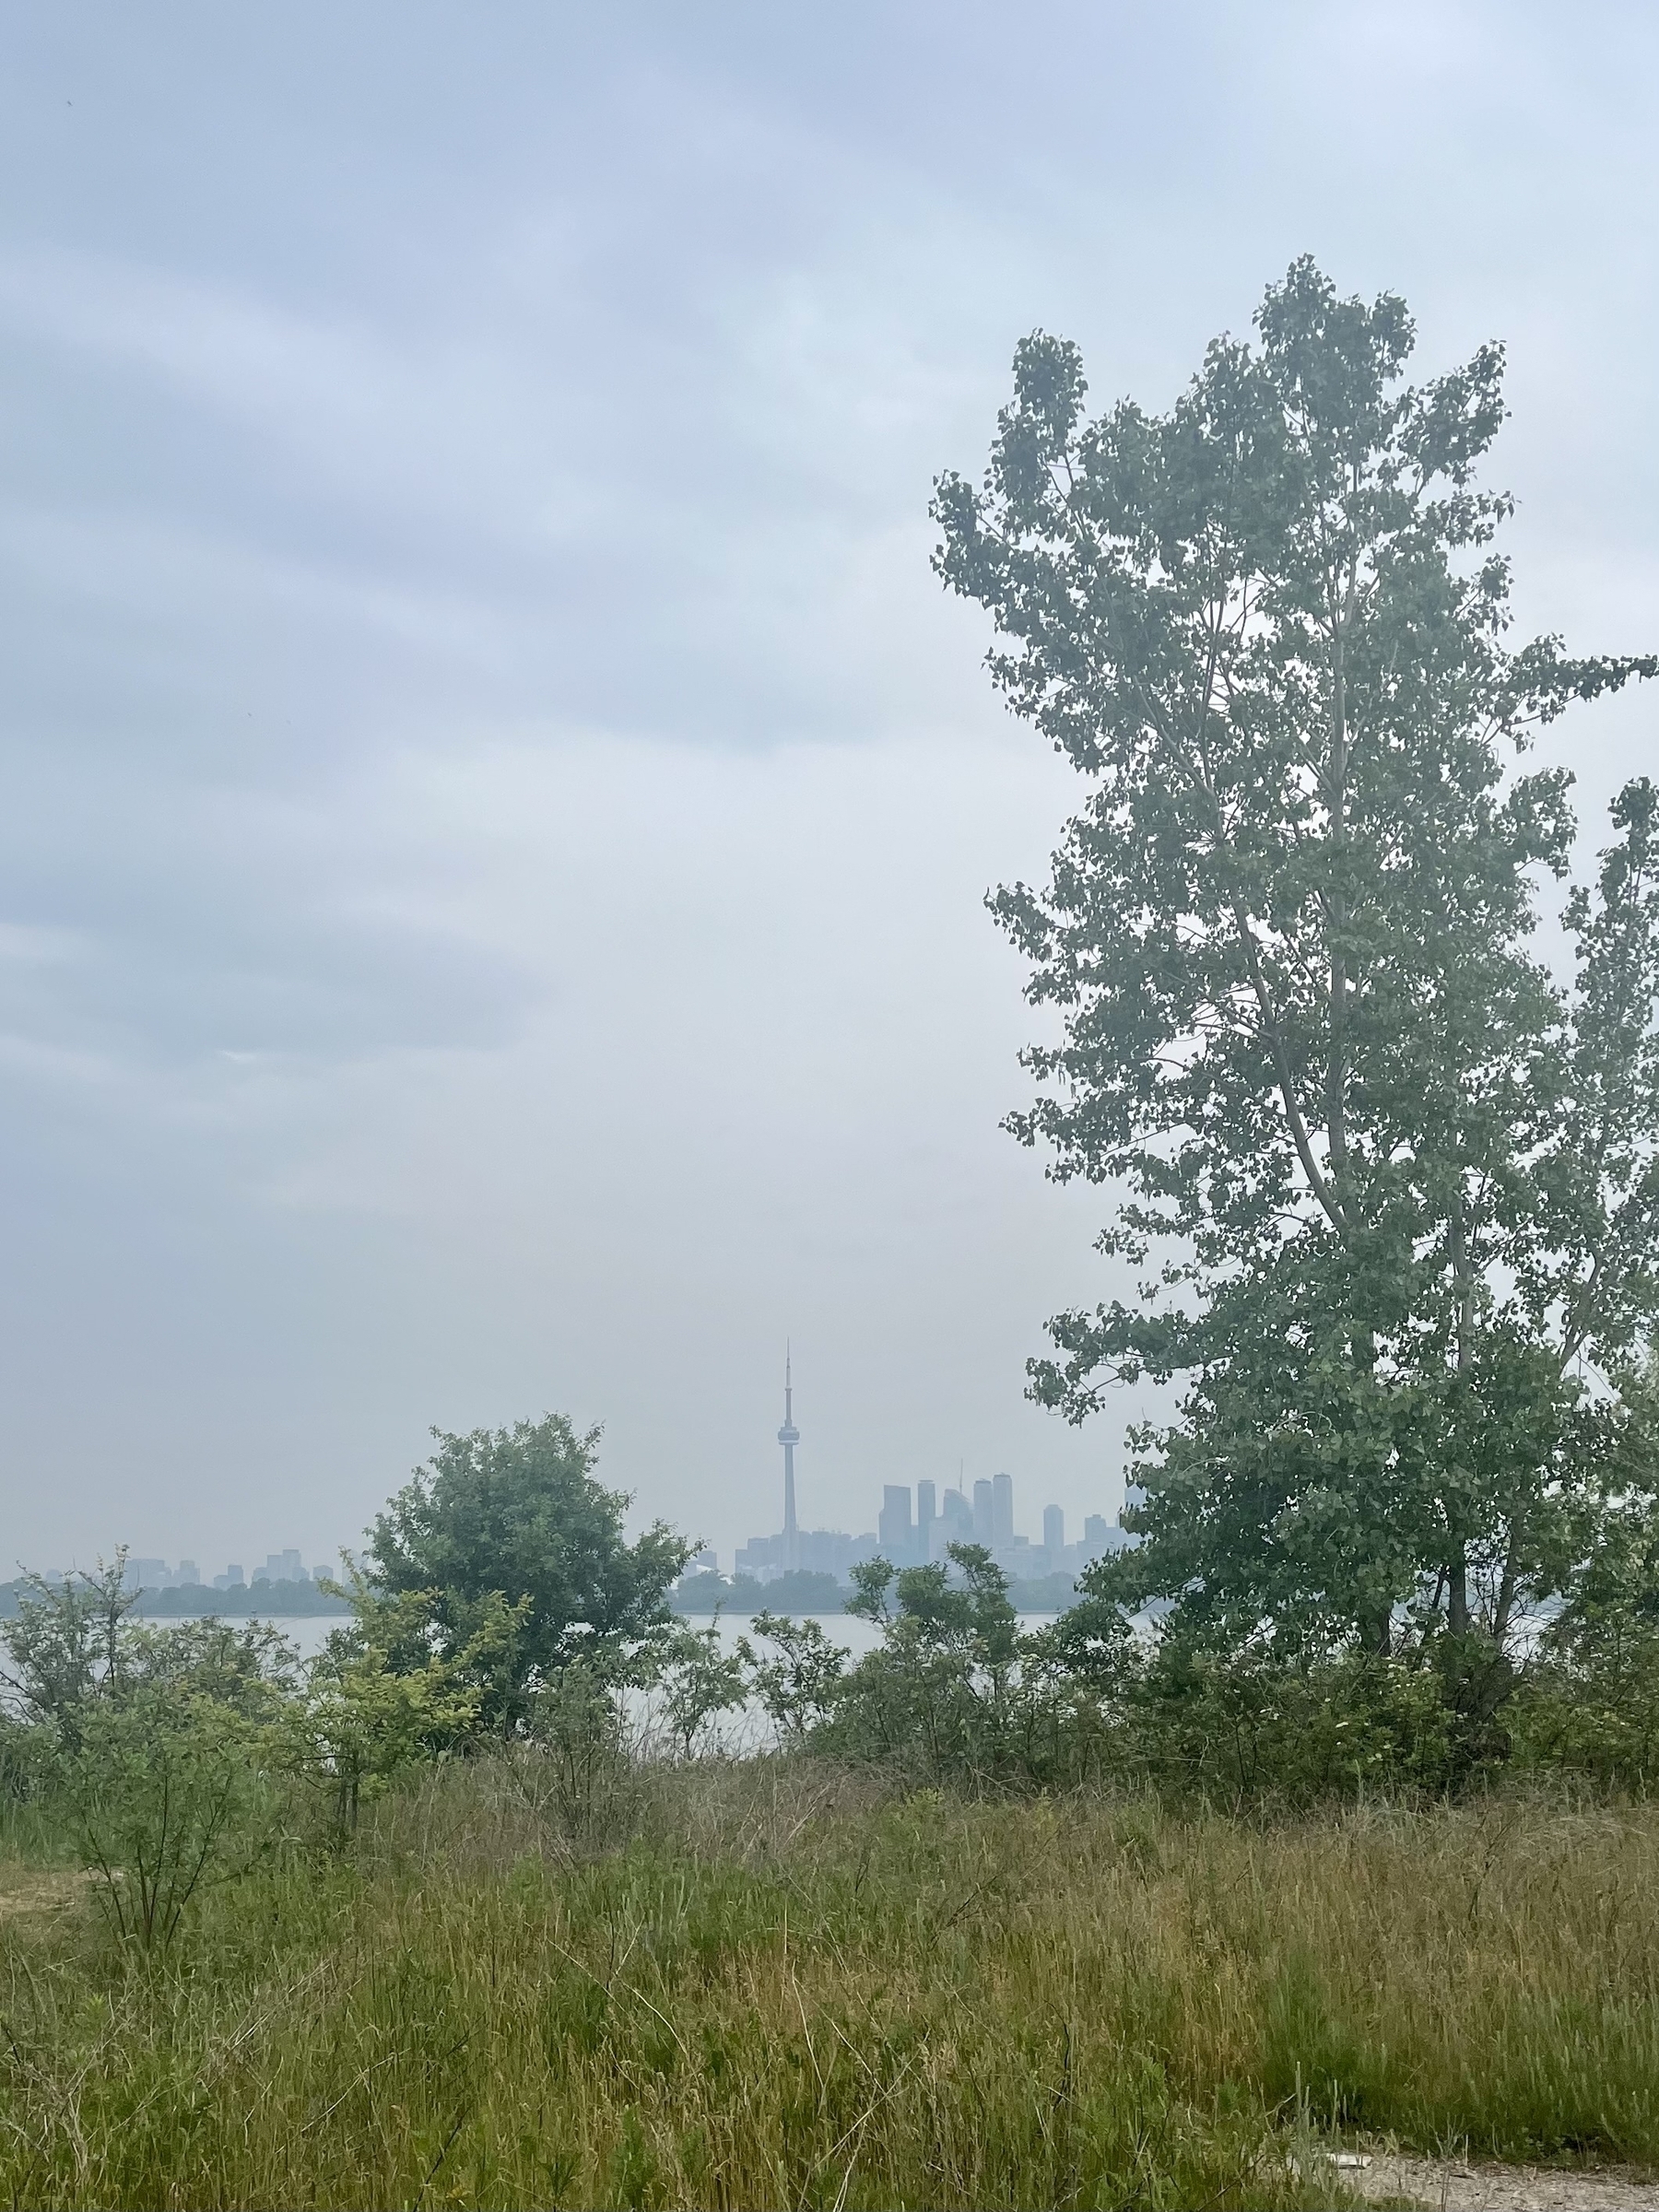 The Toronto skyline behind some trees. Air is a bit hazzy with clouds 